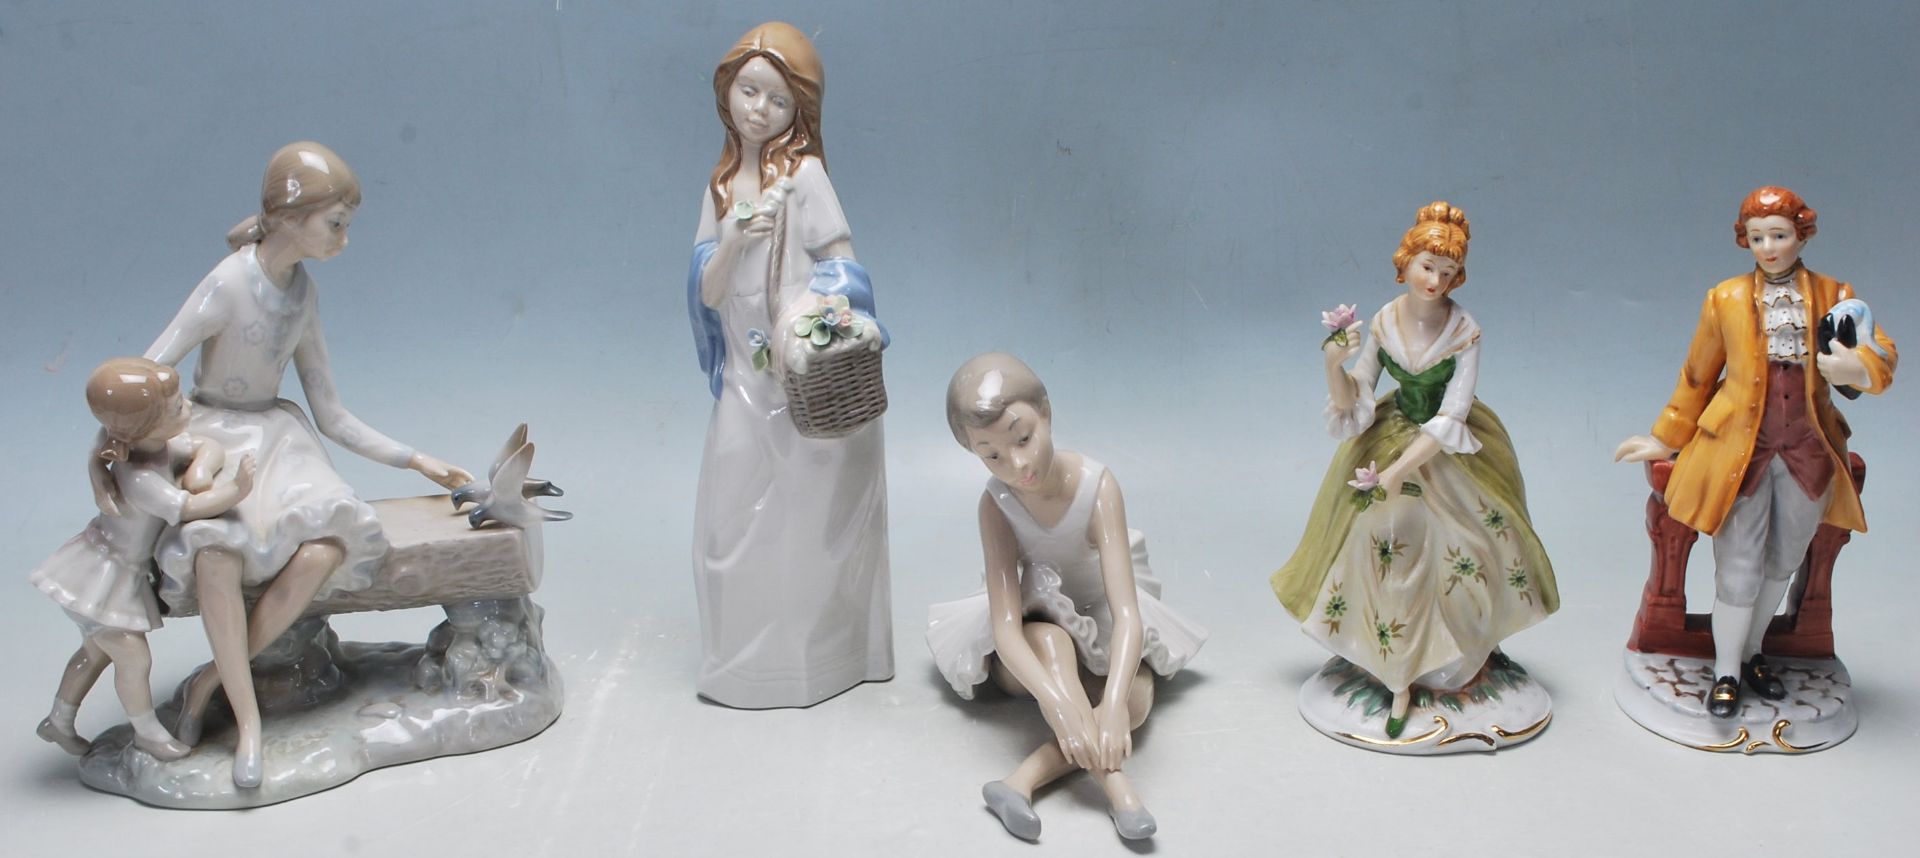 COLLECTION OF LATE 20TH CENTURY CERAMIC FIGURINES BY NAO, MARCO GINERO ETC